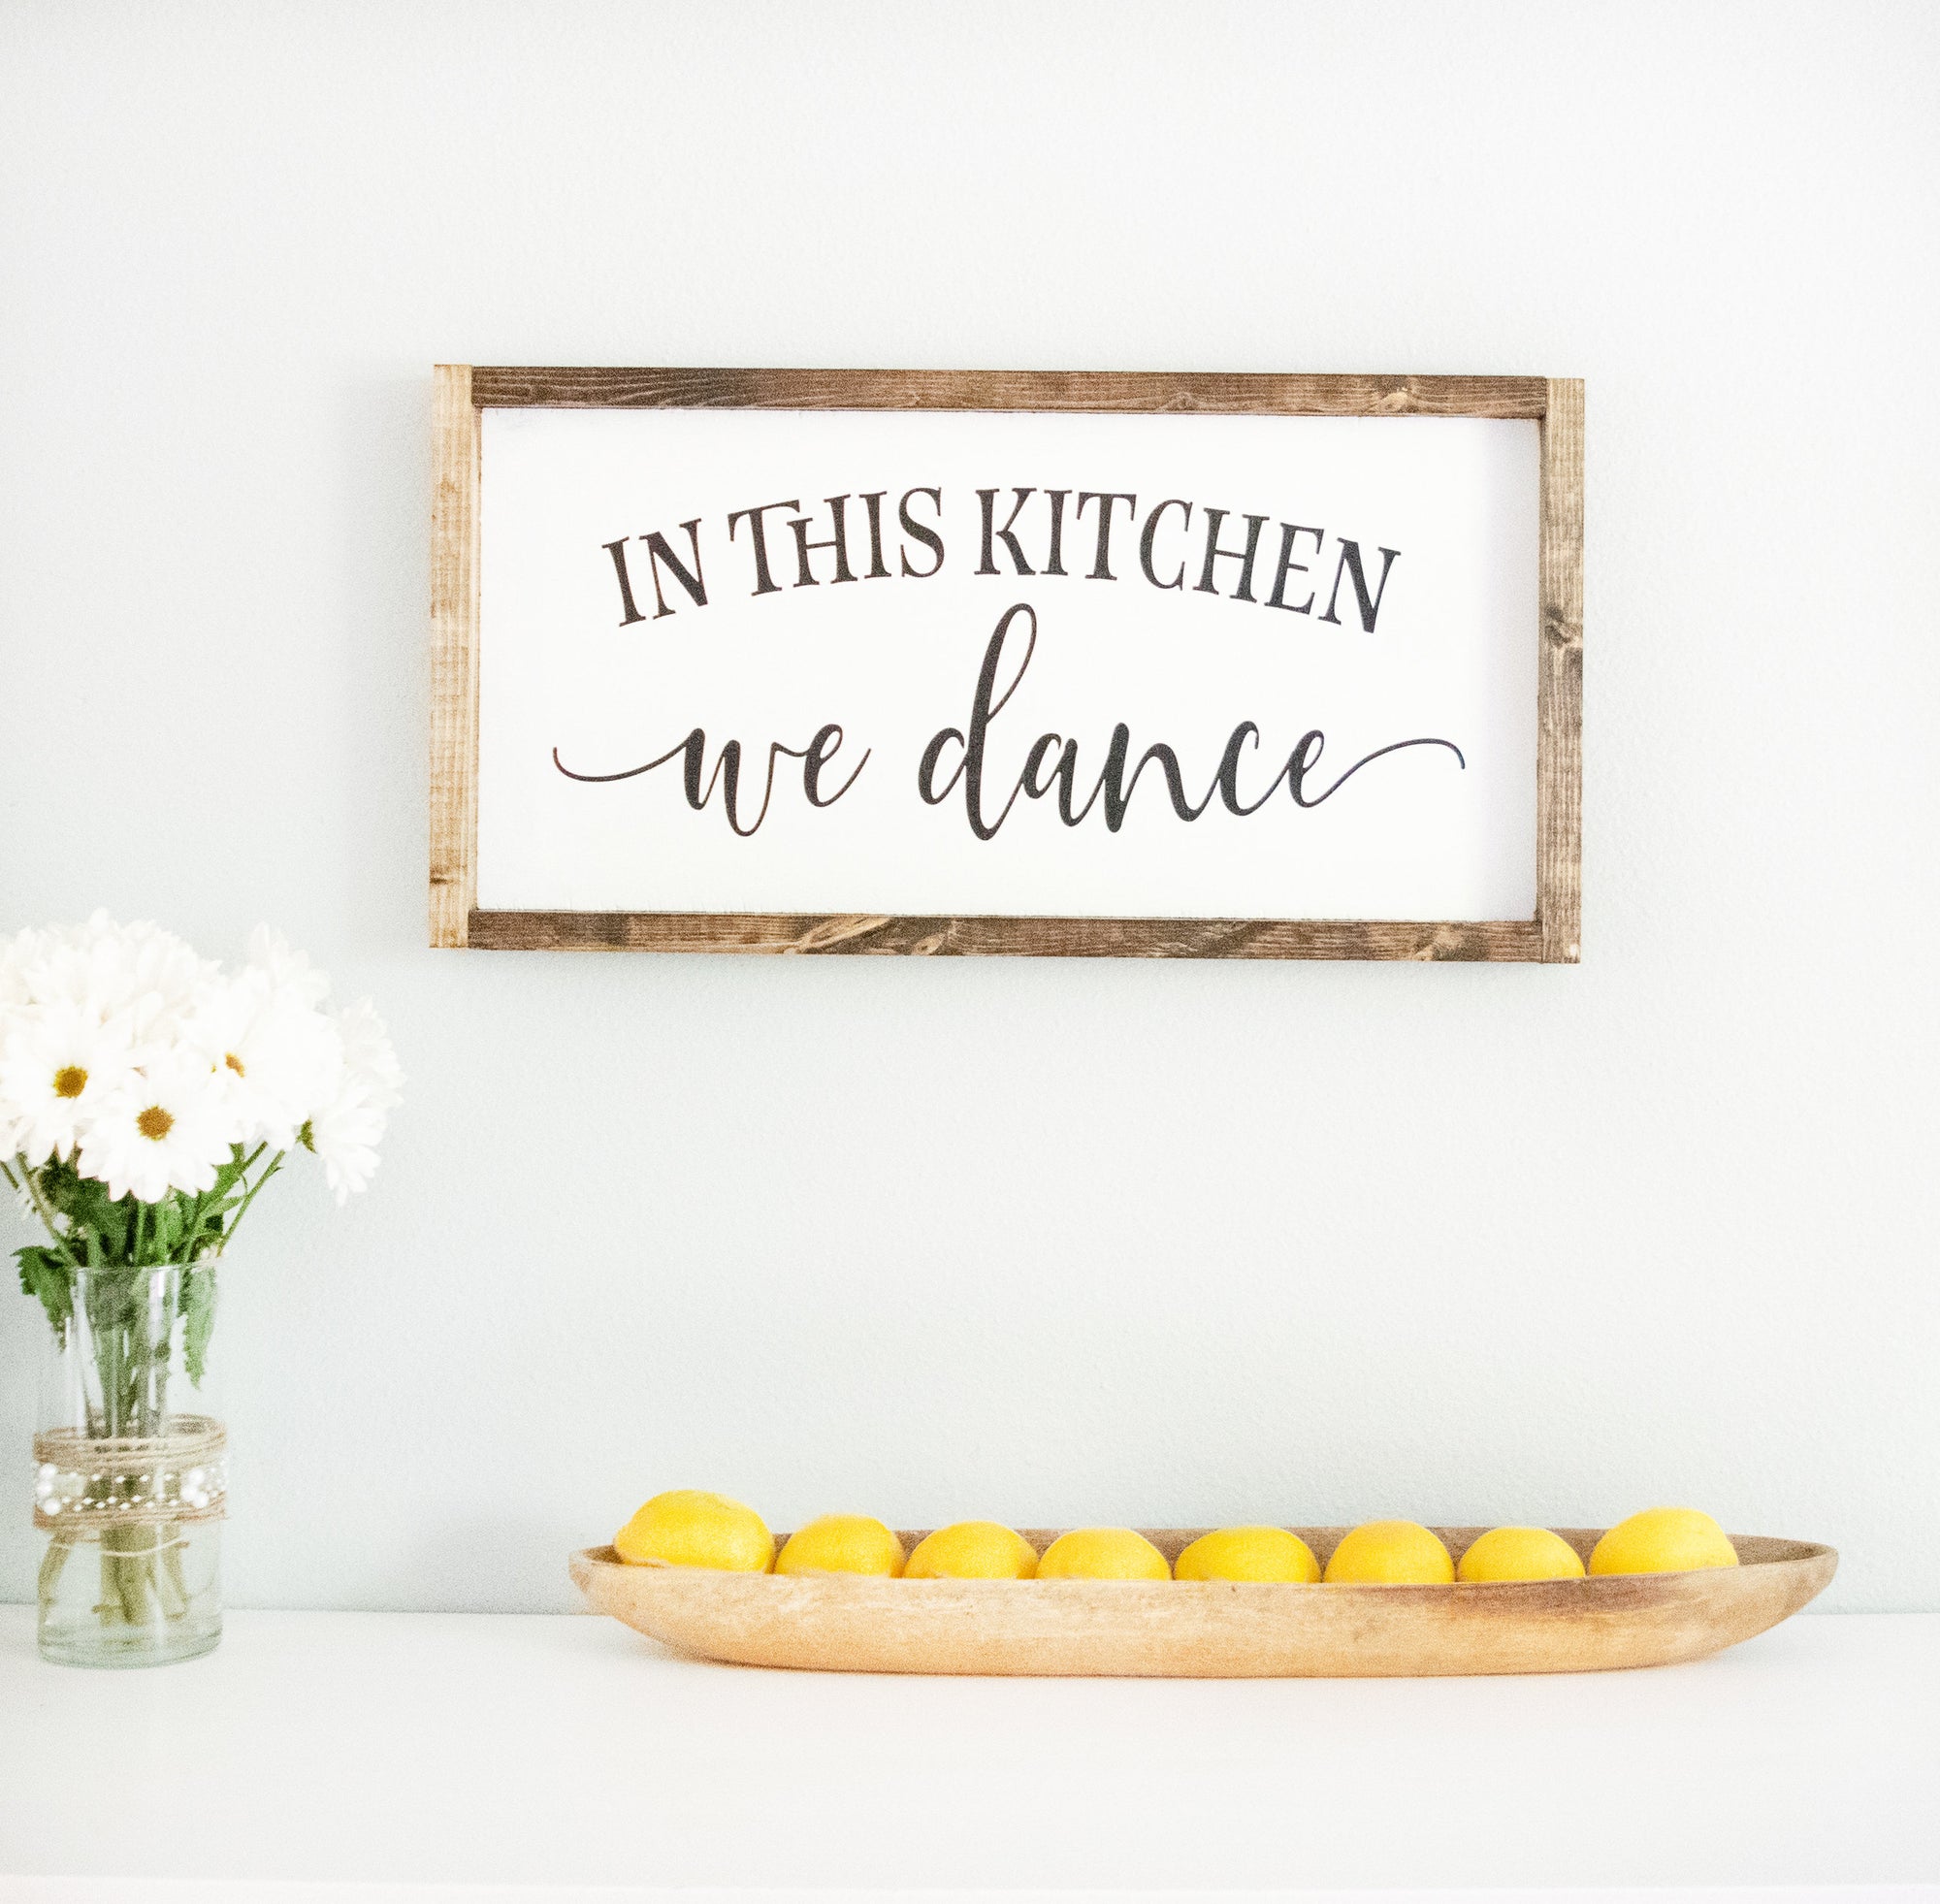 In This Kitchen We Dance Large White Wood Framed Sign, wooden sayings quote sign,Kitchen Wall Decor rustic farmhouse mantel or gallery wall